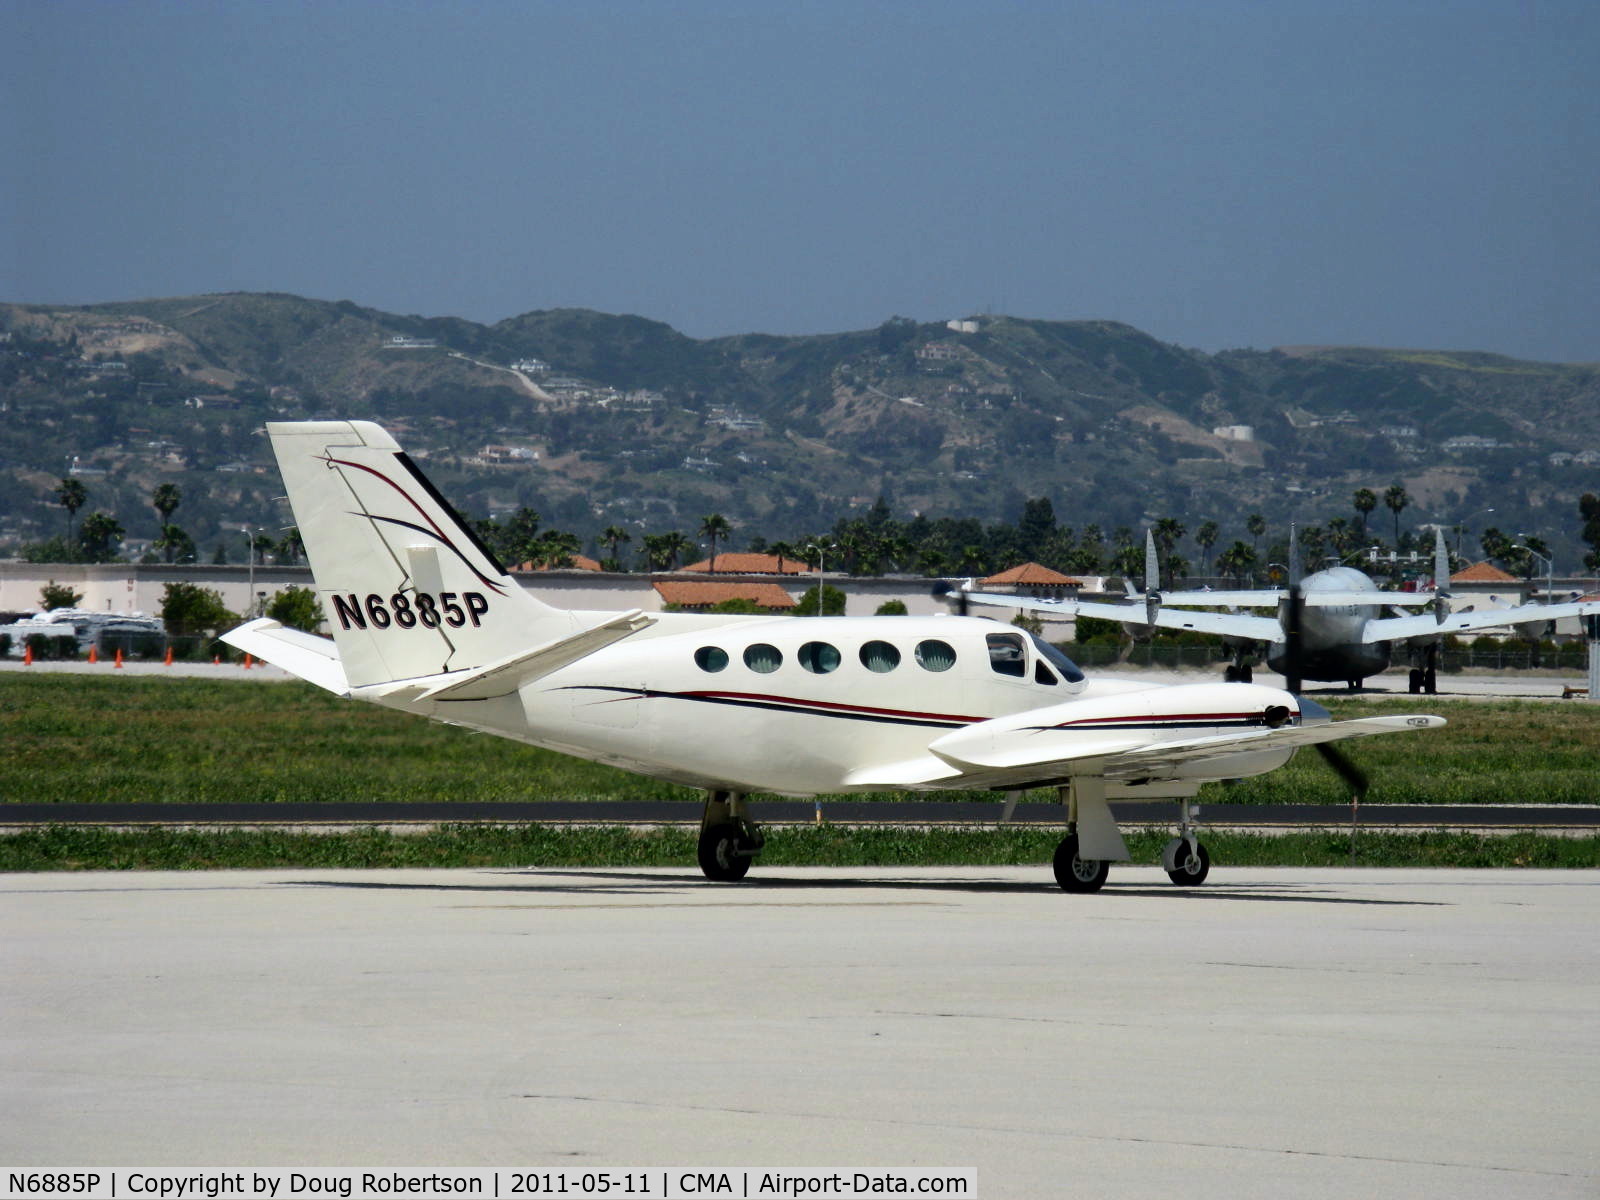 N6885P, Cessna 425 C/N 425-0143, Cessna 425 CORSAIR, two P&W(C)PT6A-112 Turboprops 450 shp each, three-blade wide chord CS Hartzell props, Pressurized, taxi after landing Rwy 26